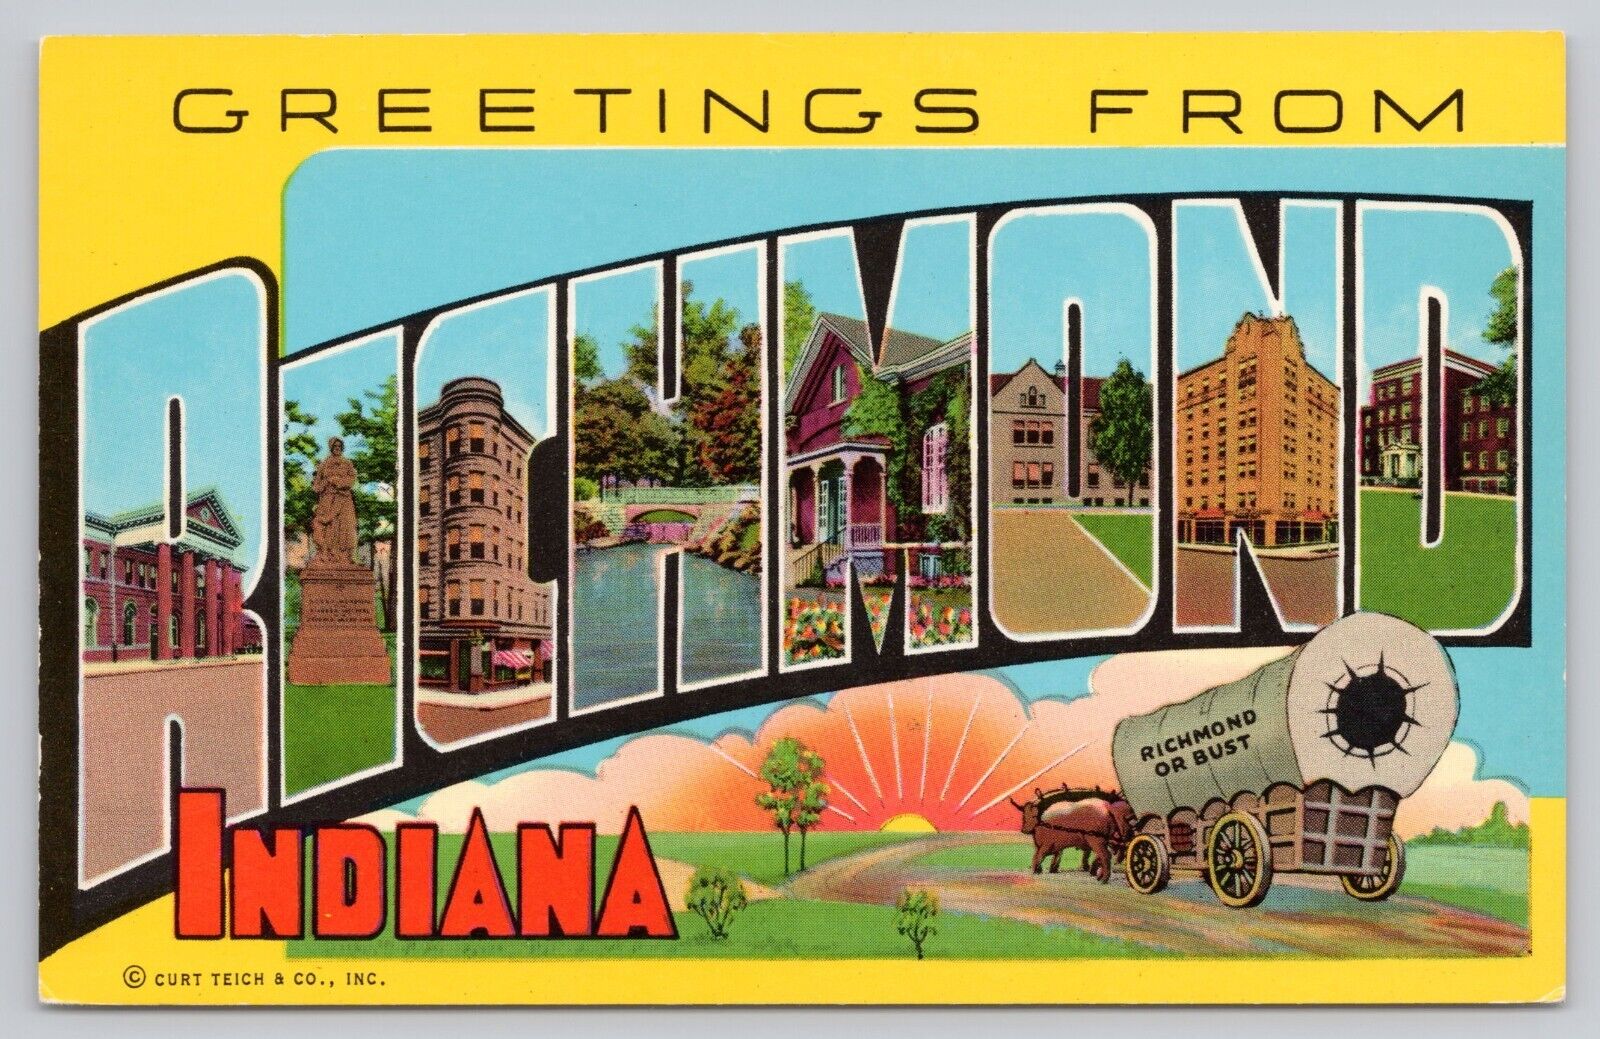 Richmond Indiana, Large Letter Greetings, Covered Wagon, Vintage Postcard